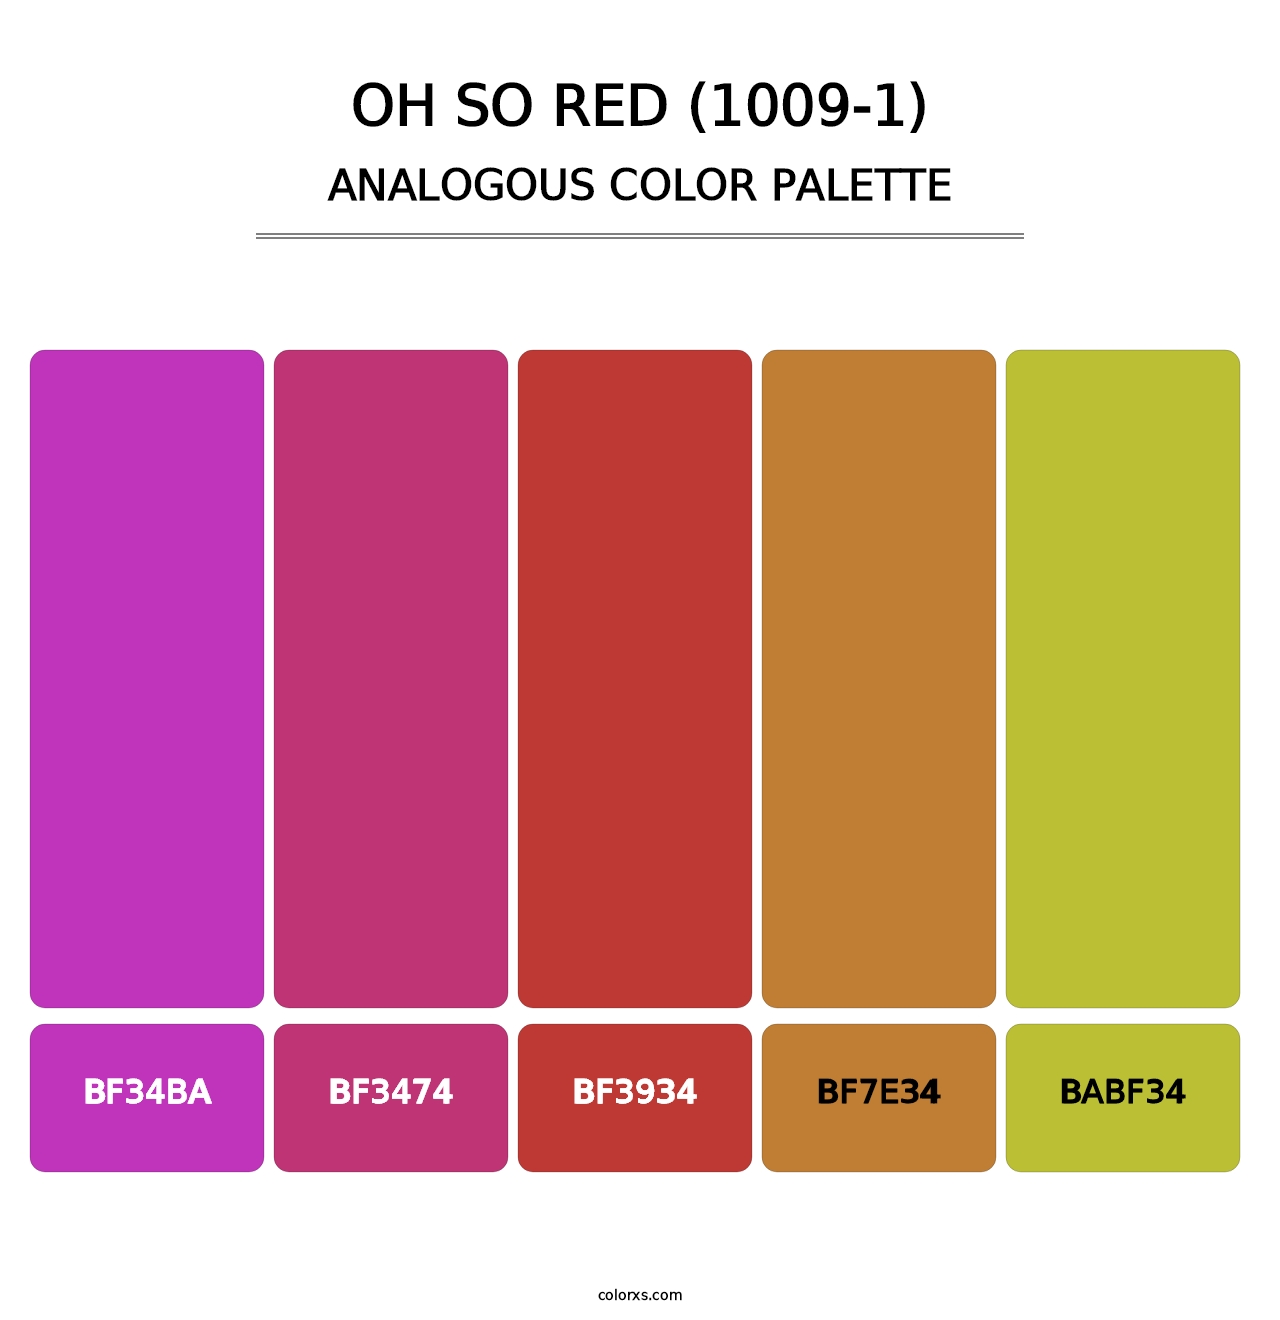 Oh So Red (1009-1) - Analogous Color Palette